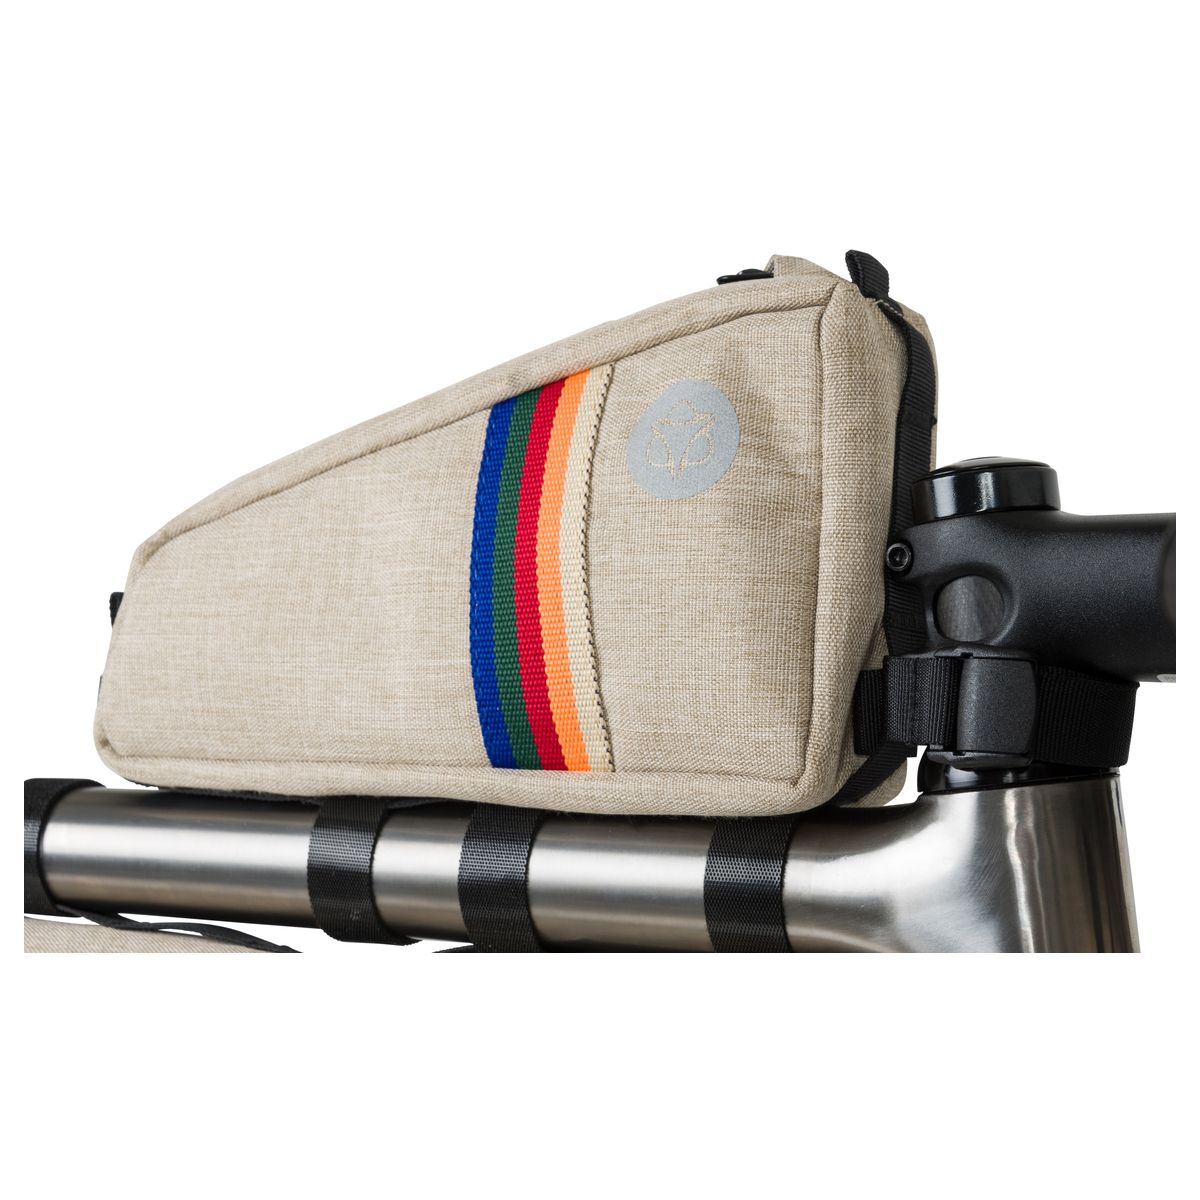 Top-Tube Frame Bag Venture fit example